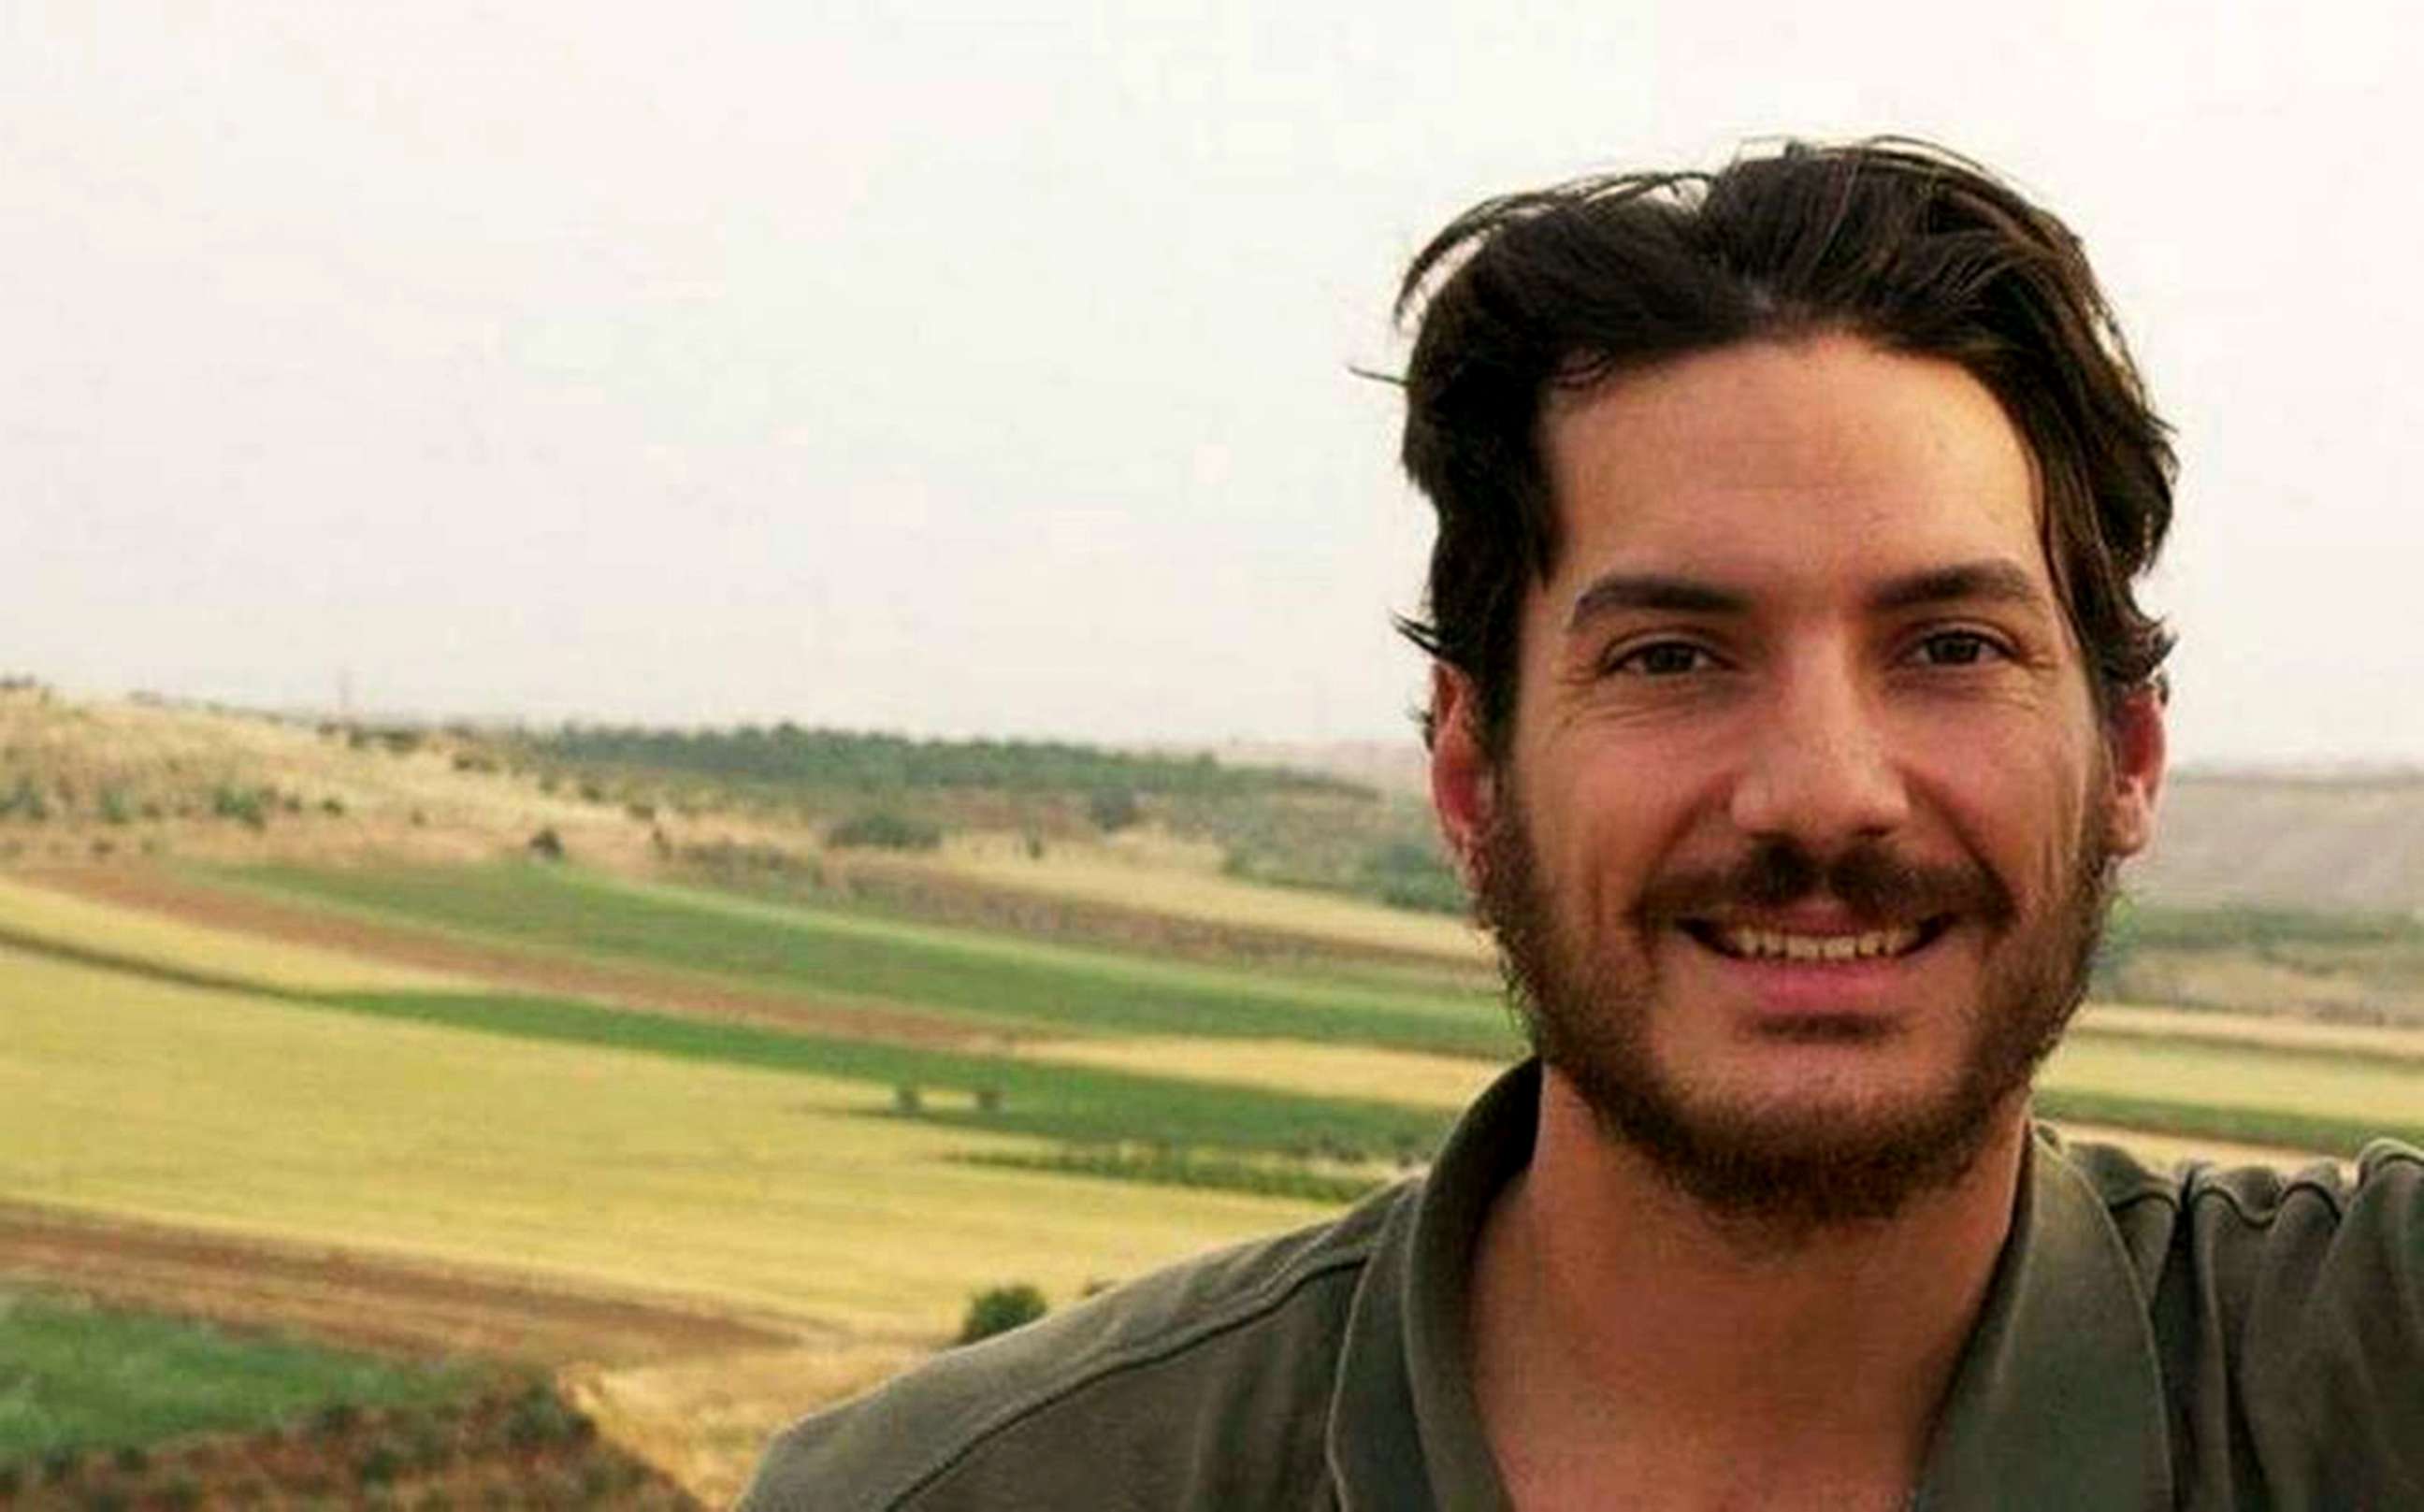 PHOTO: Freelance journalist Austin Tice, seen in this undated photo, went missing in Syria in 2012 and has not been heard from since.